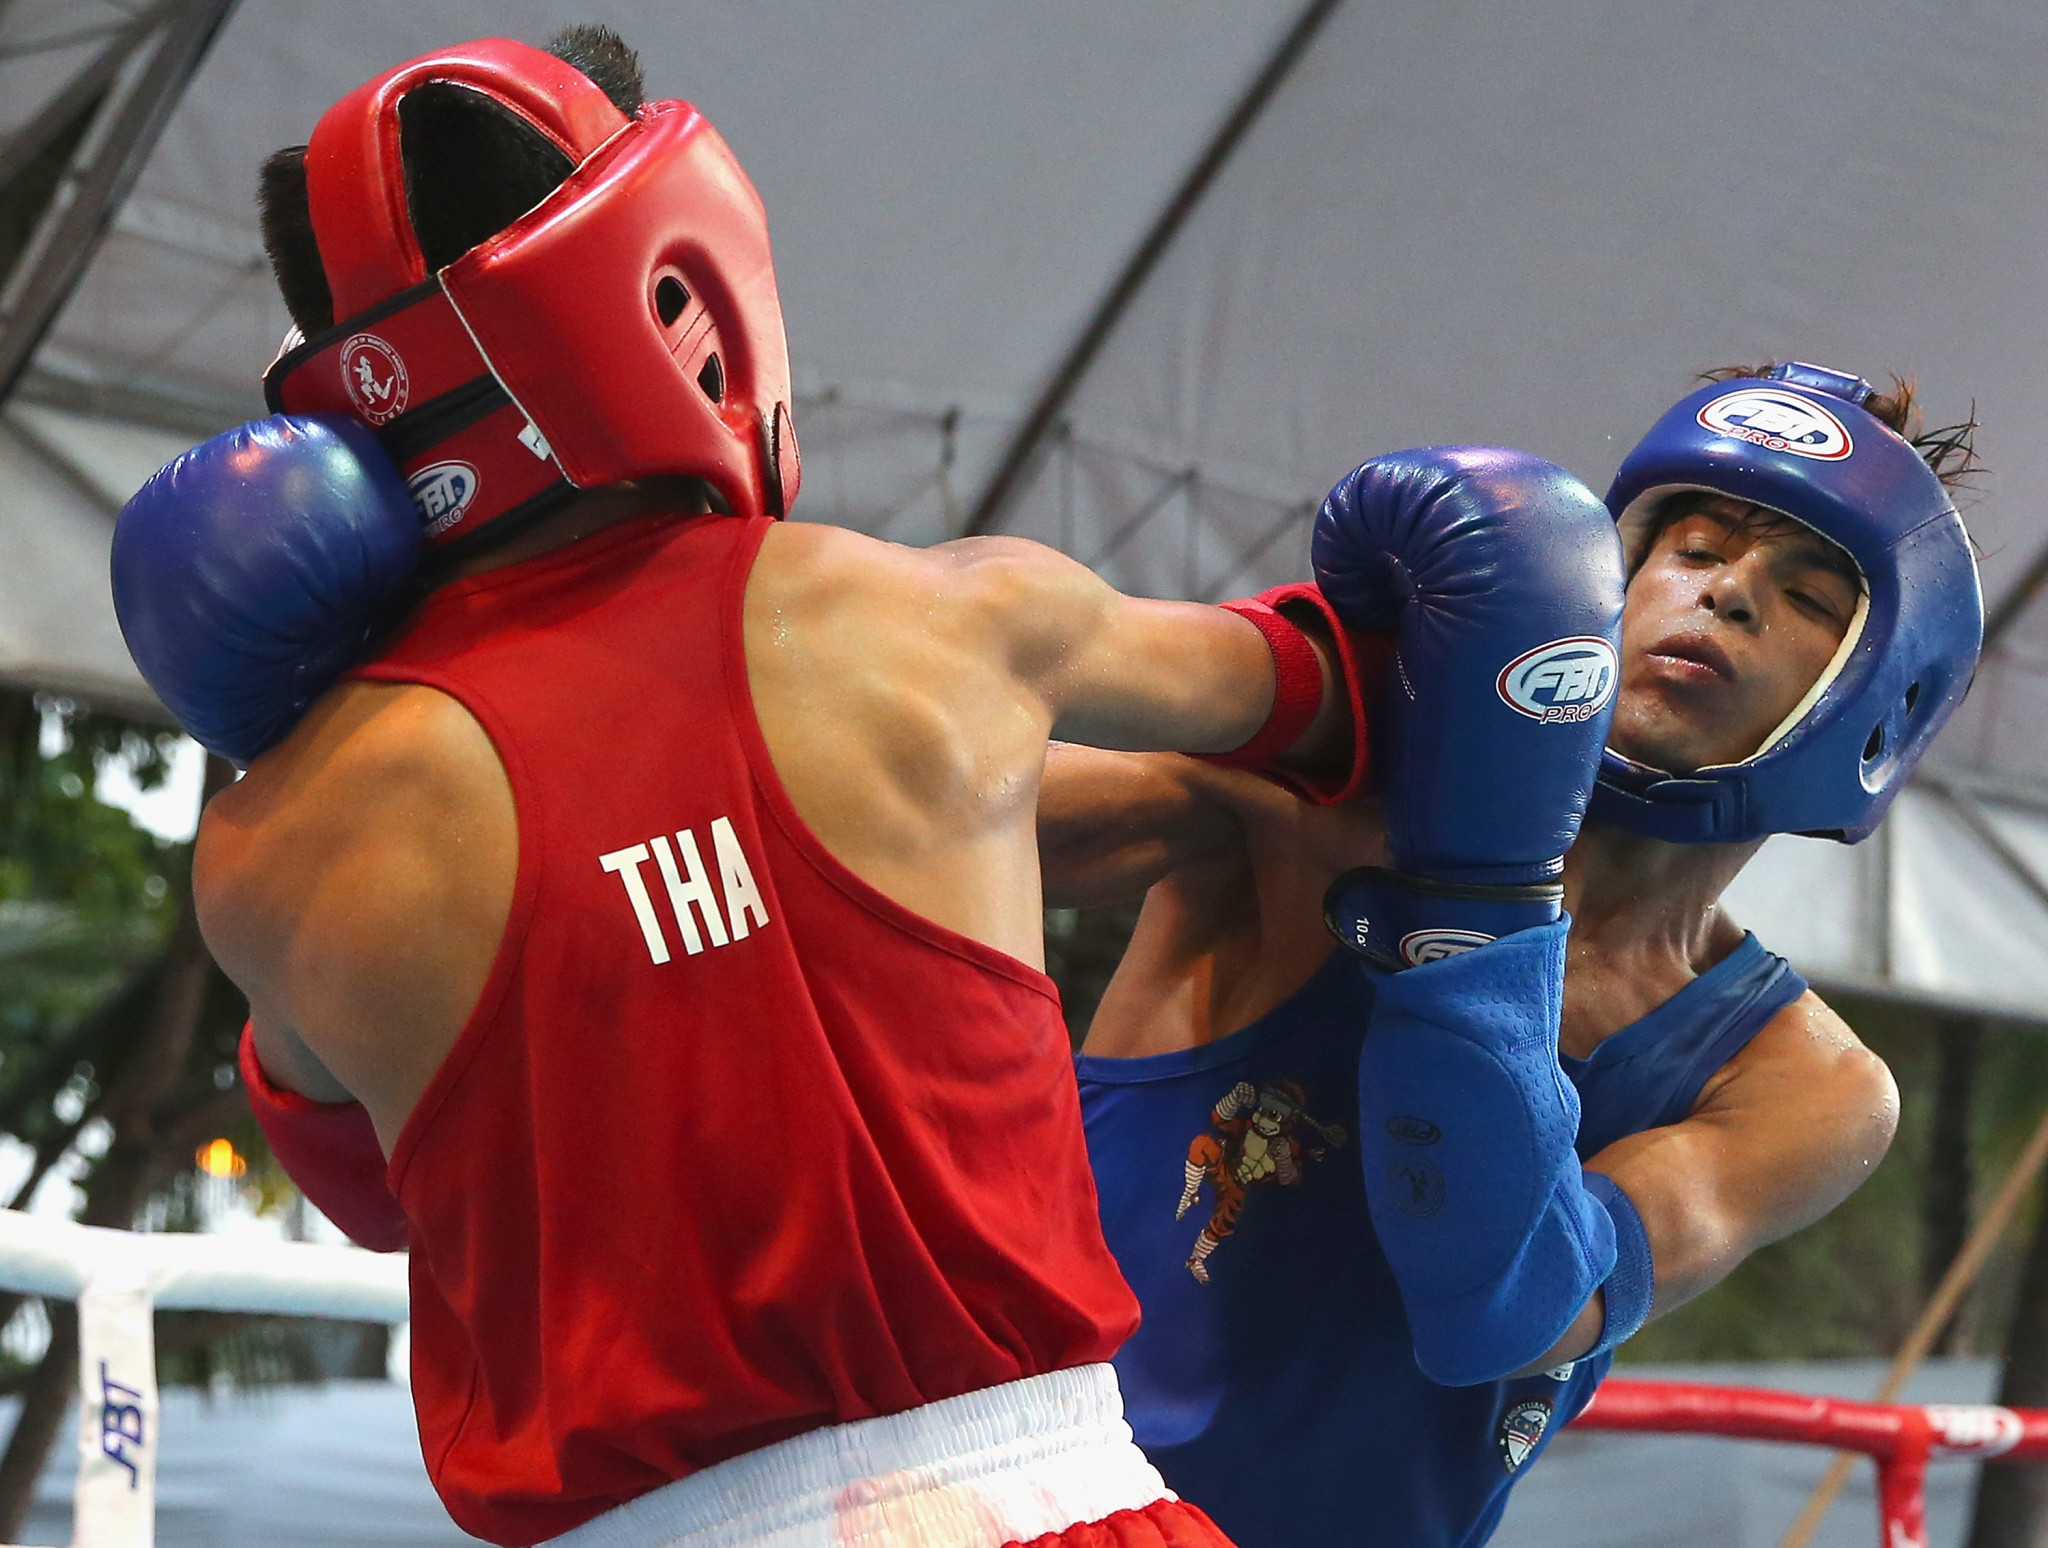 Russian fighters star in IFMA World Muaythai Championships in Bangkok